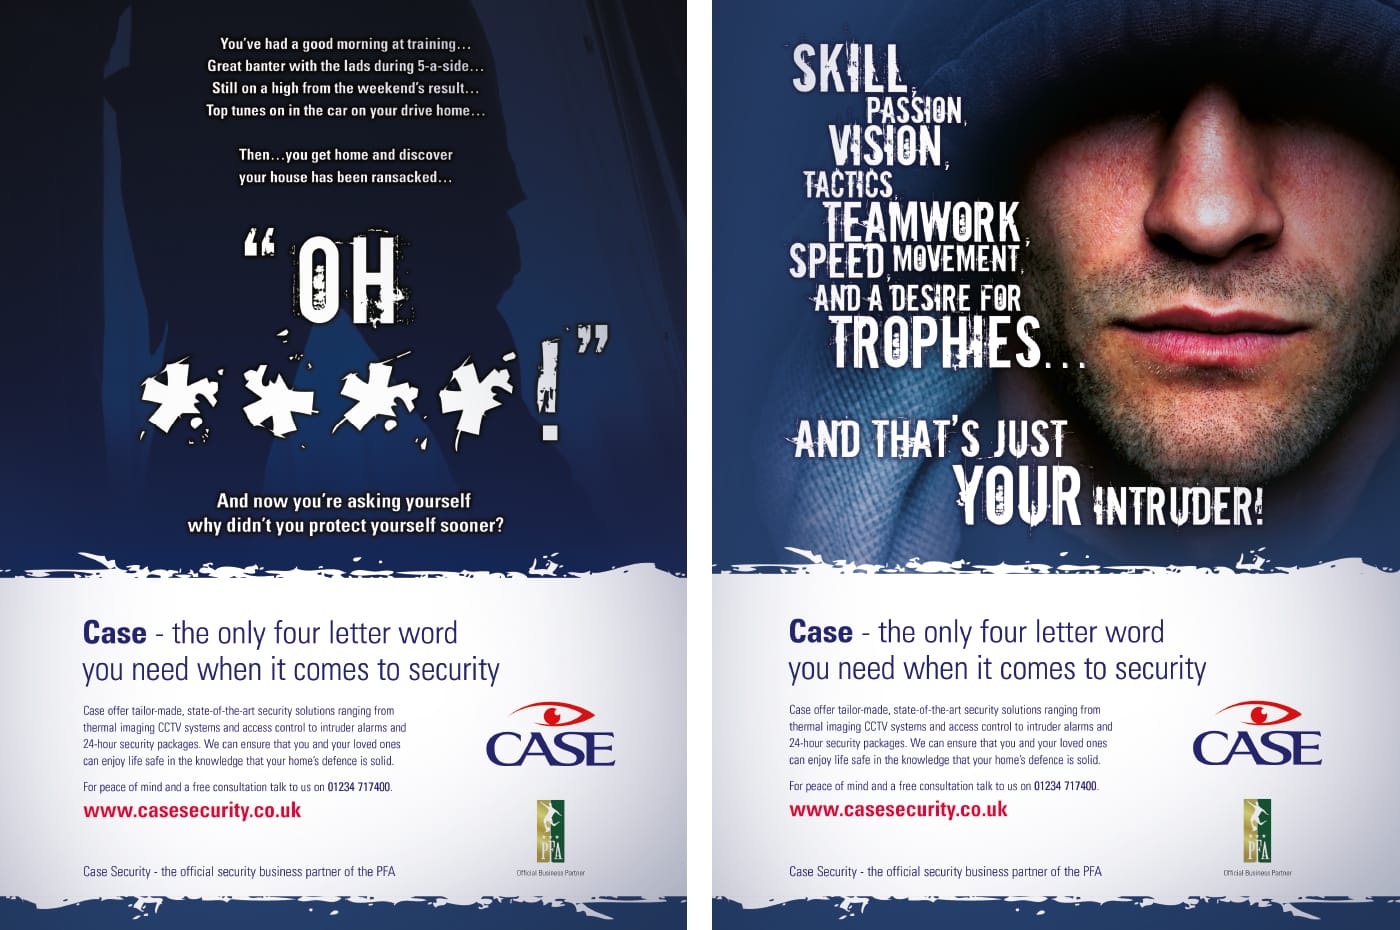 Design, writing and production of an advertising campaign aimed at professional footballers on behalf of a national security company.